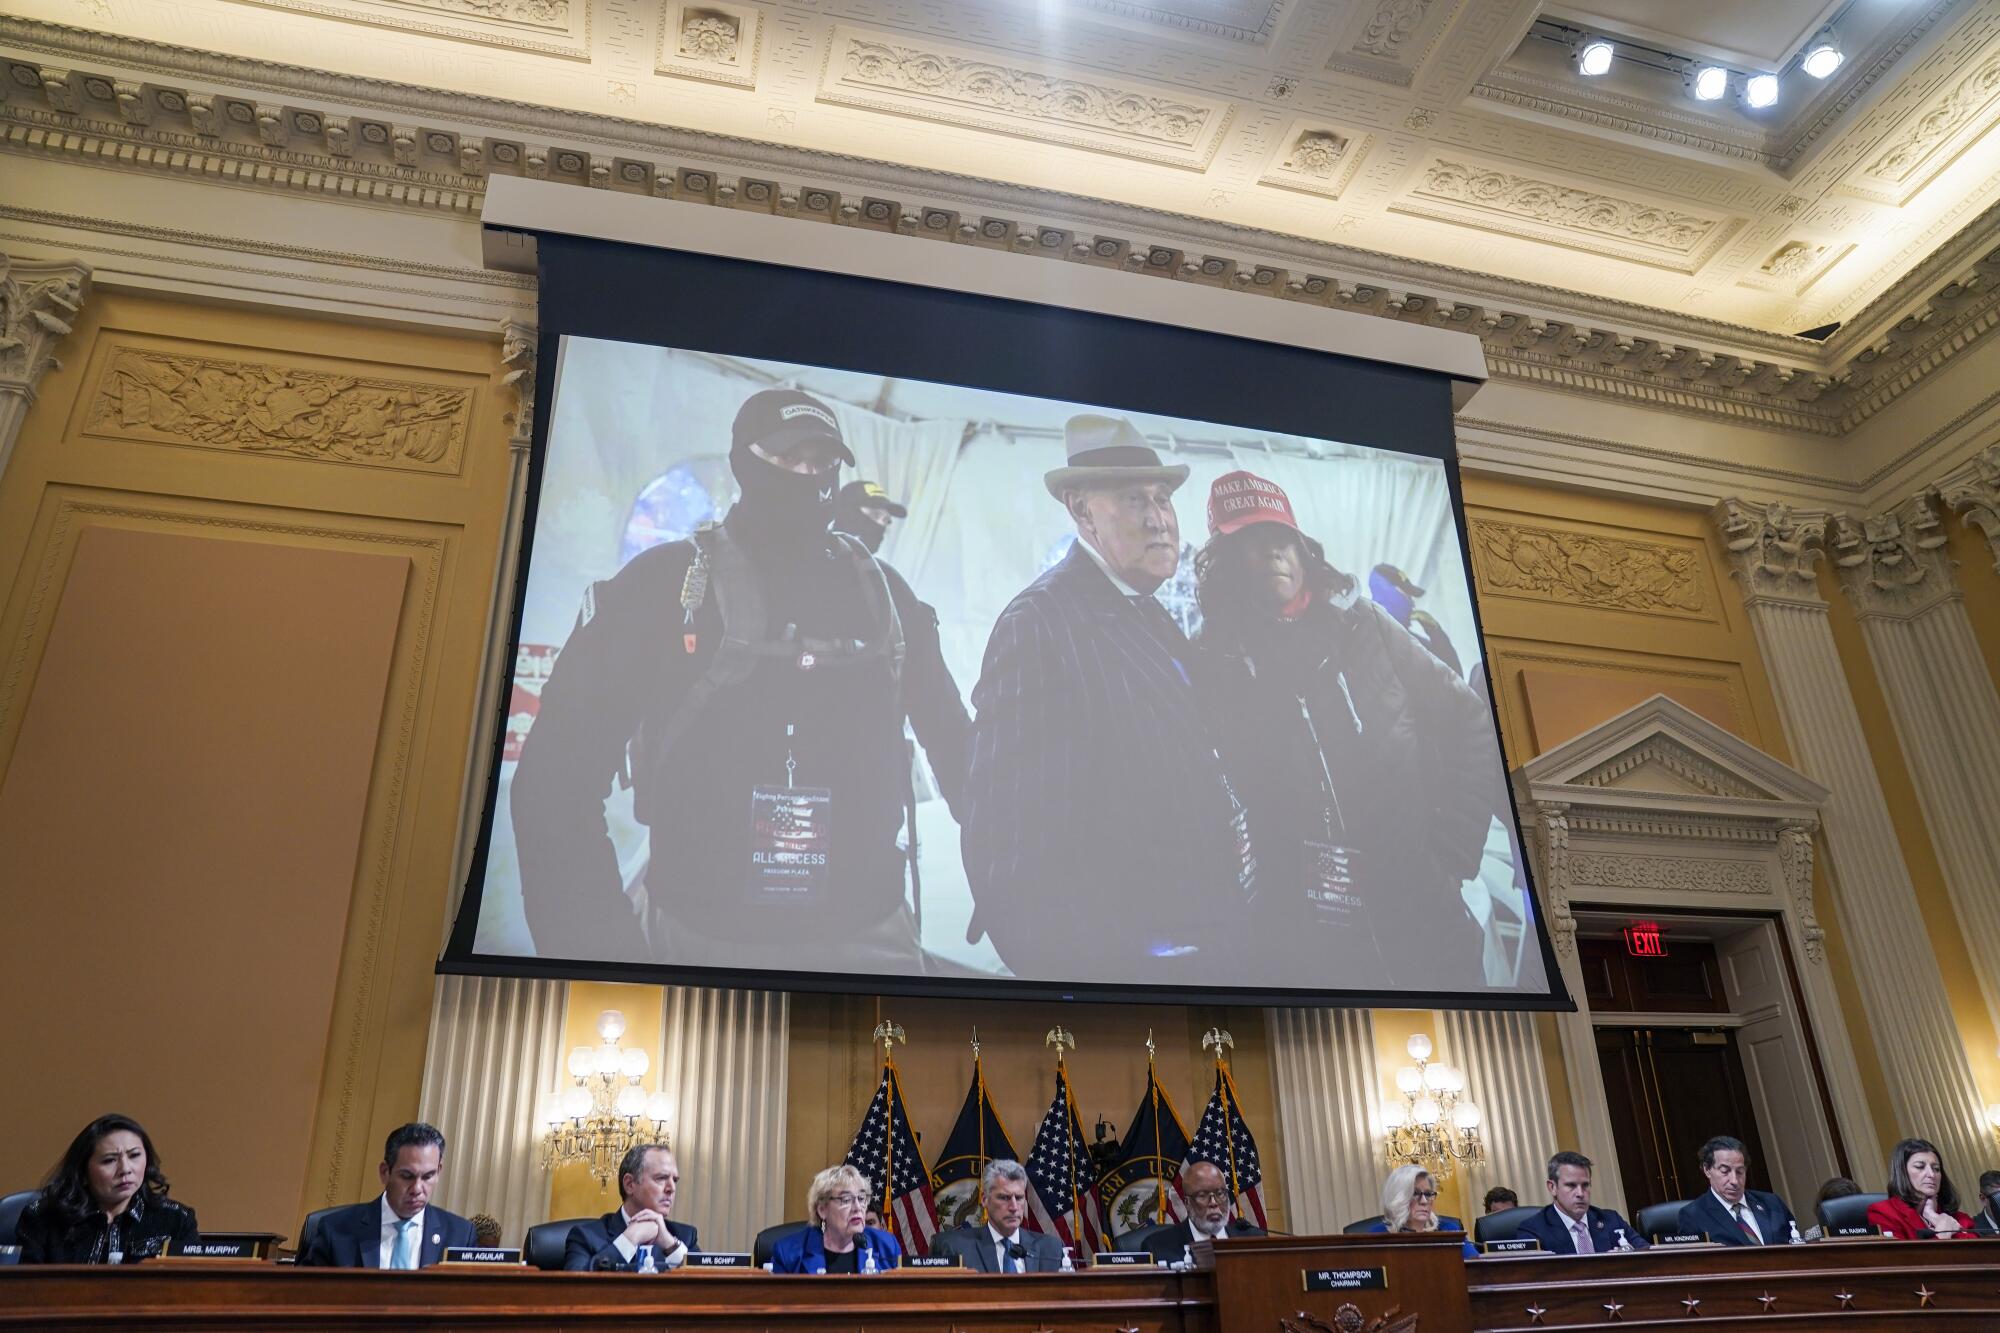 A photo of Roger Stone, former advisor to Donald Trump, with Oath Keepers members is projected during a hearing Oct. 13.